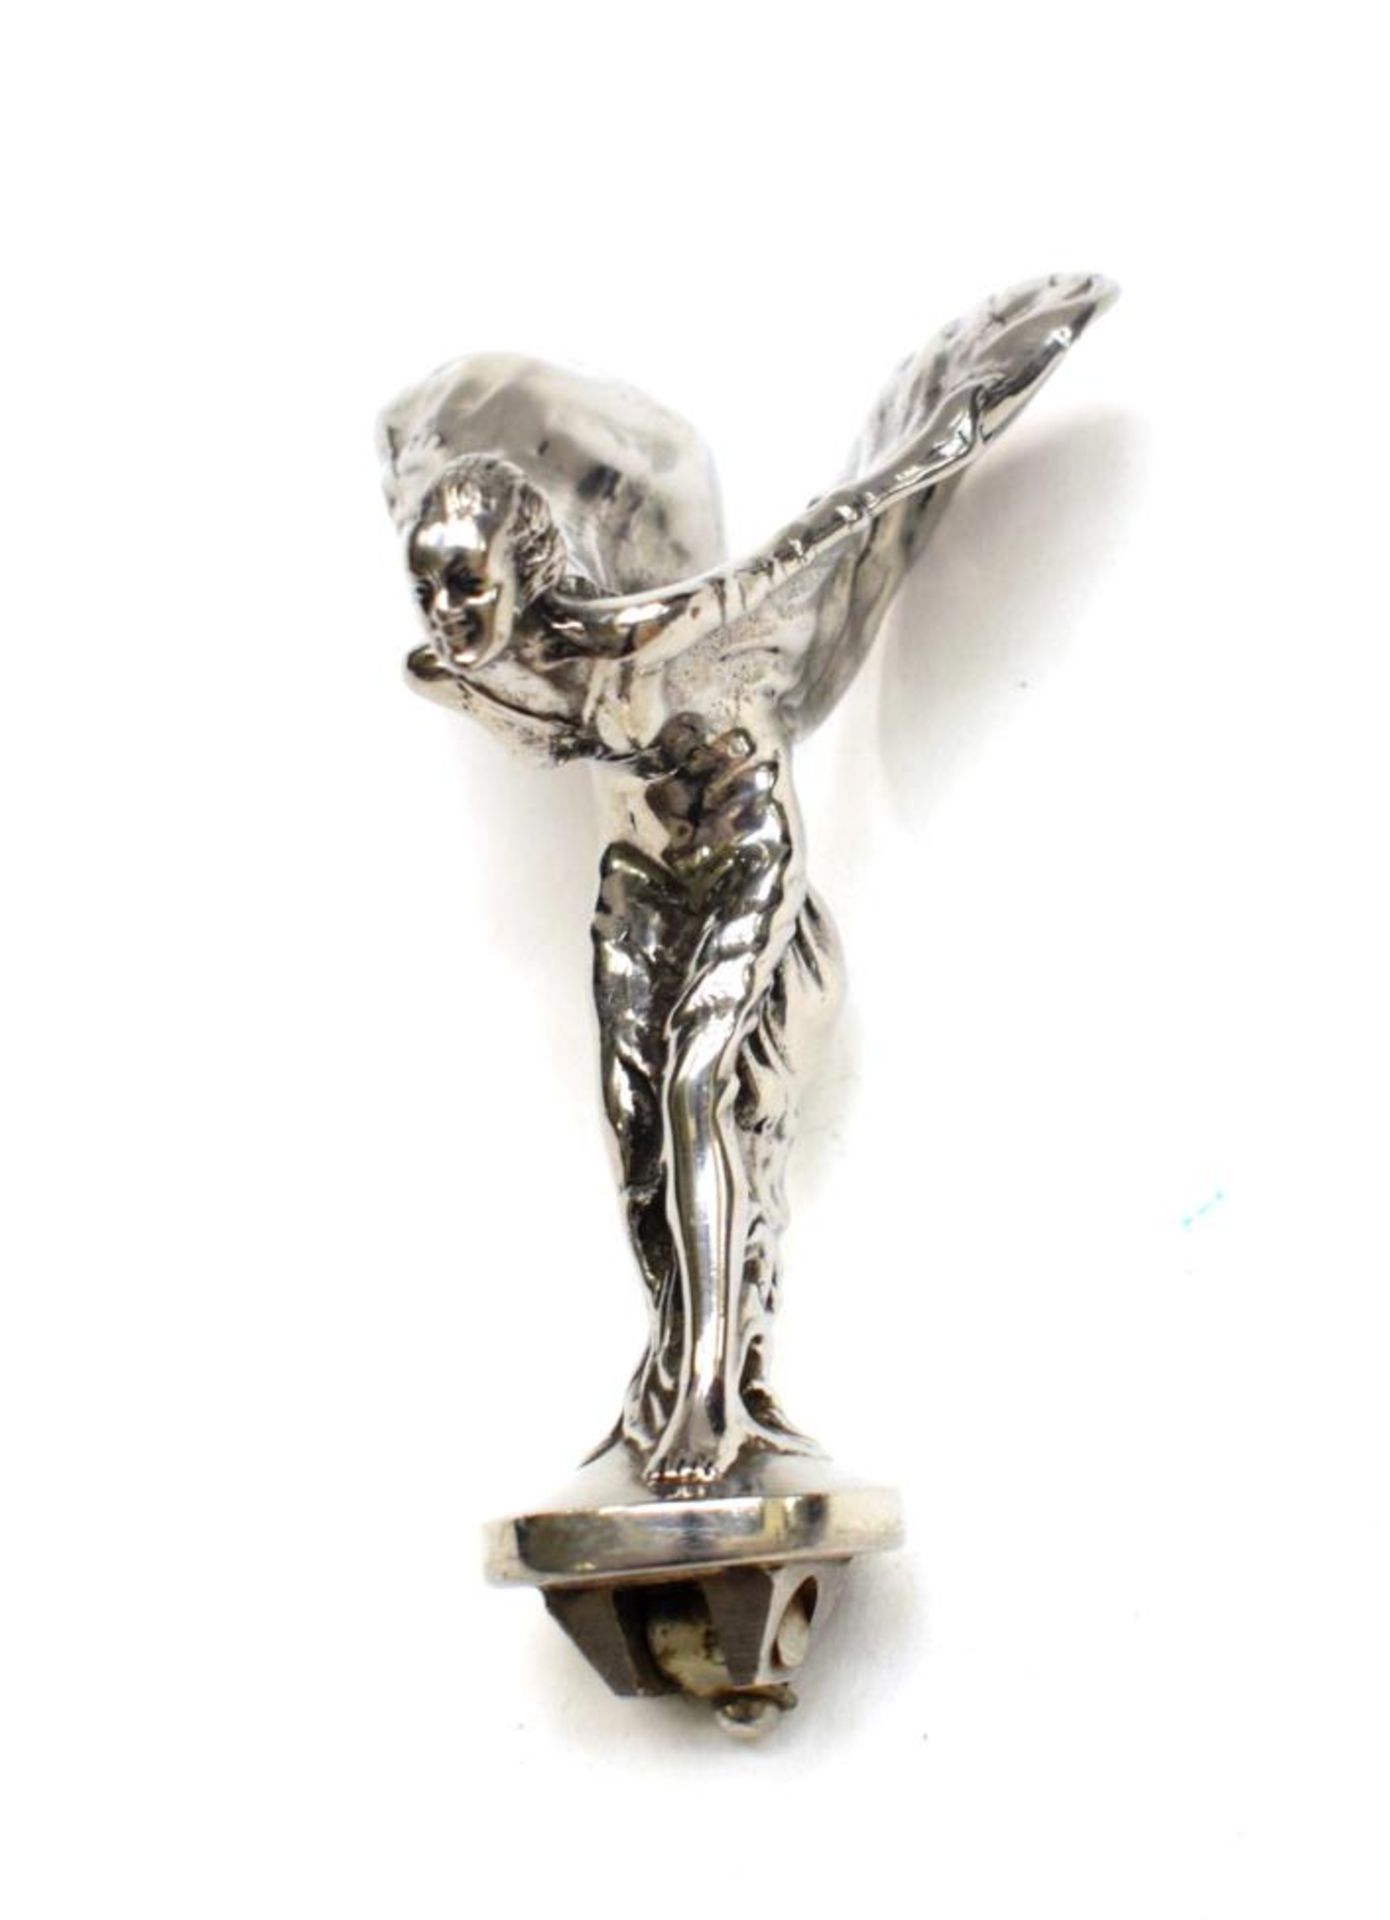 A 1920/30 Nickle Plated Spirit of Ecstasy Car Mascot, unmarked, standing on circular base with